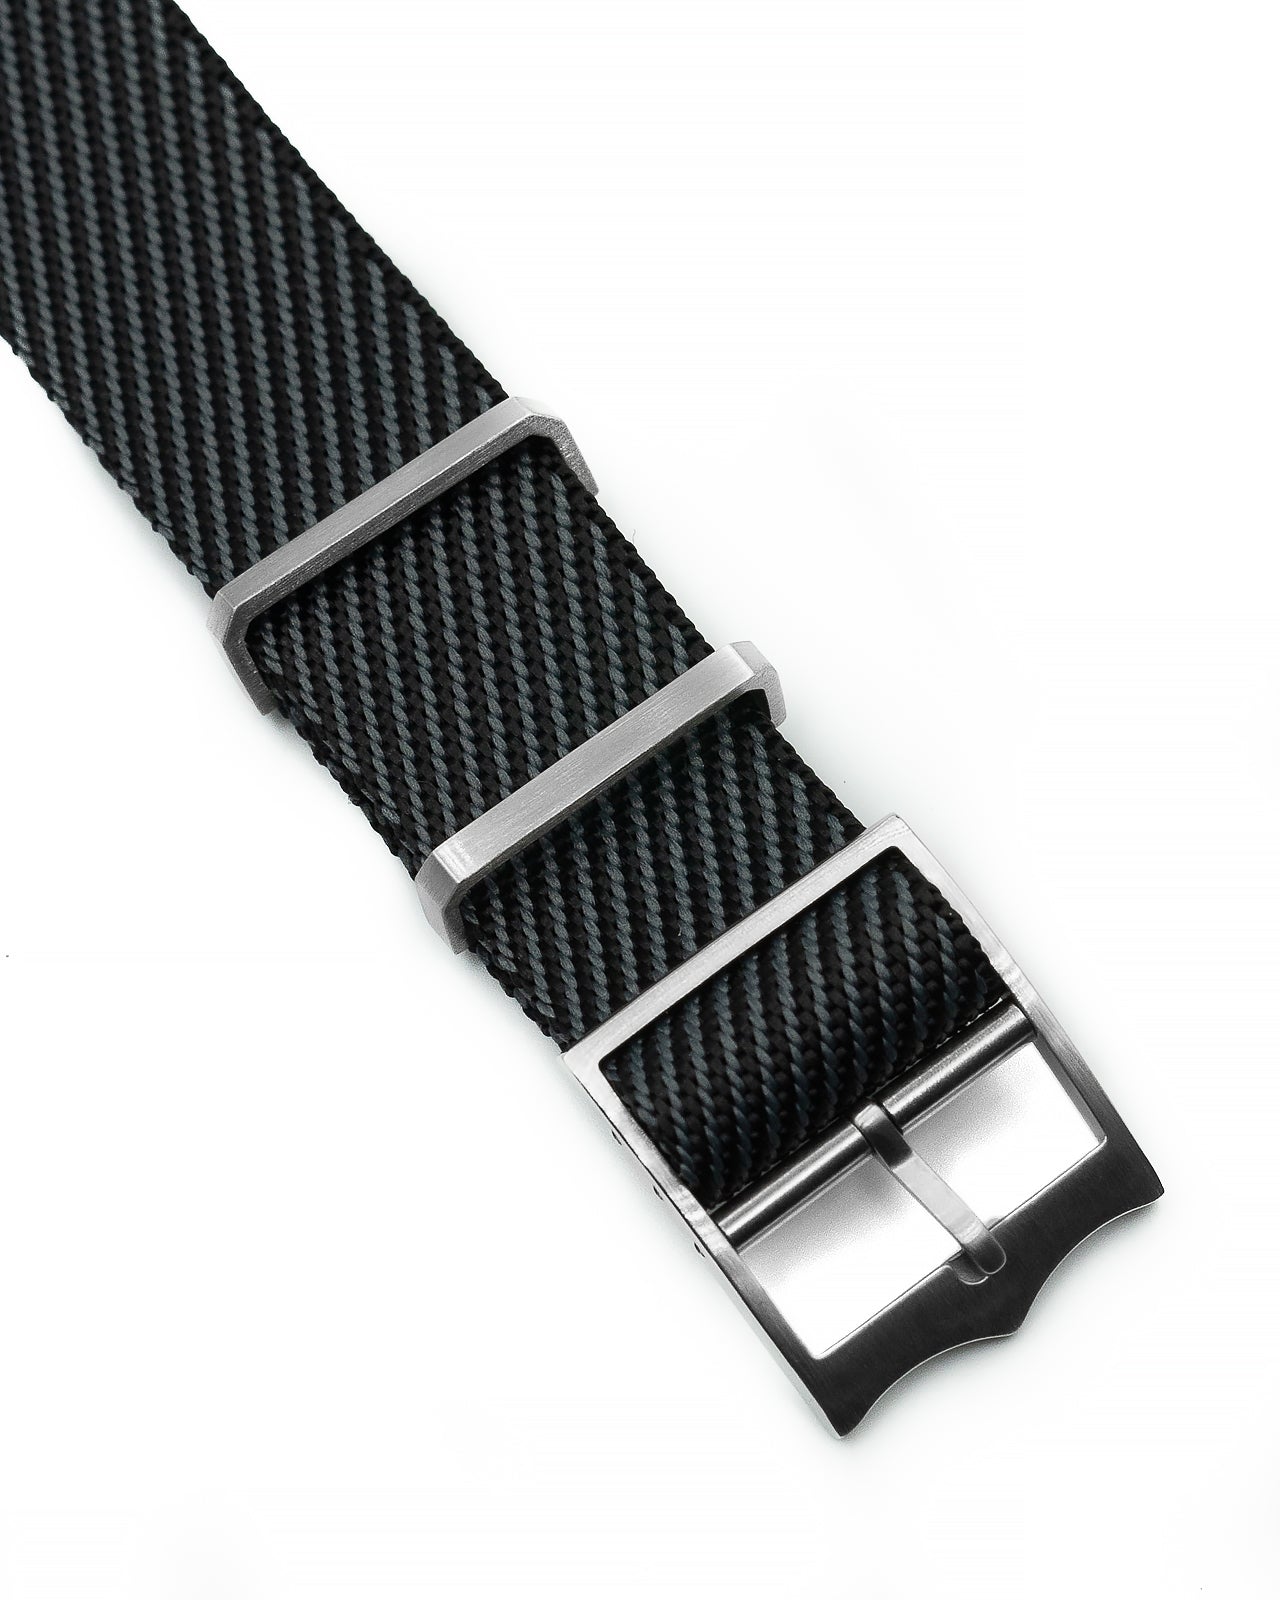 Bakeey BlackPro Star Light Adjustable Nylon Quick Release Watch Strap For Men And Women 20mm